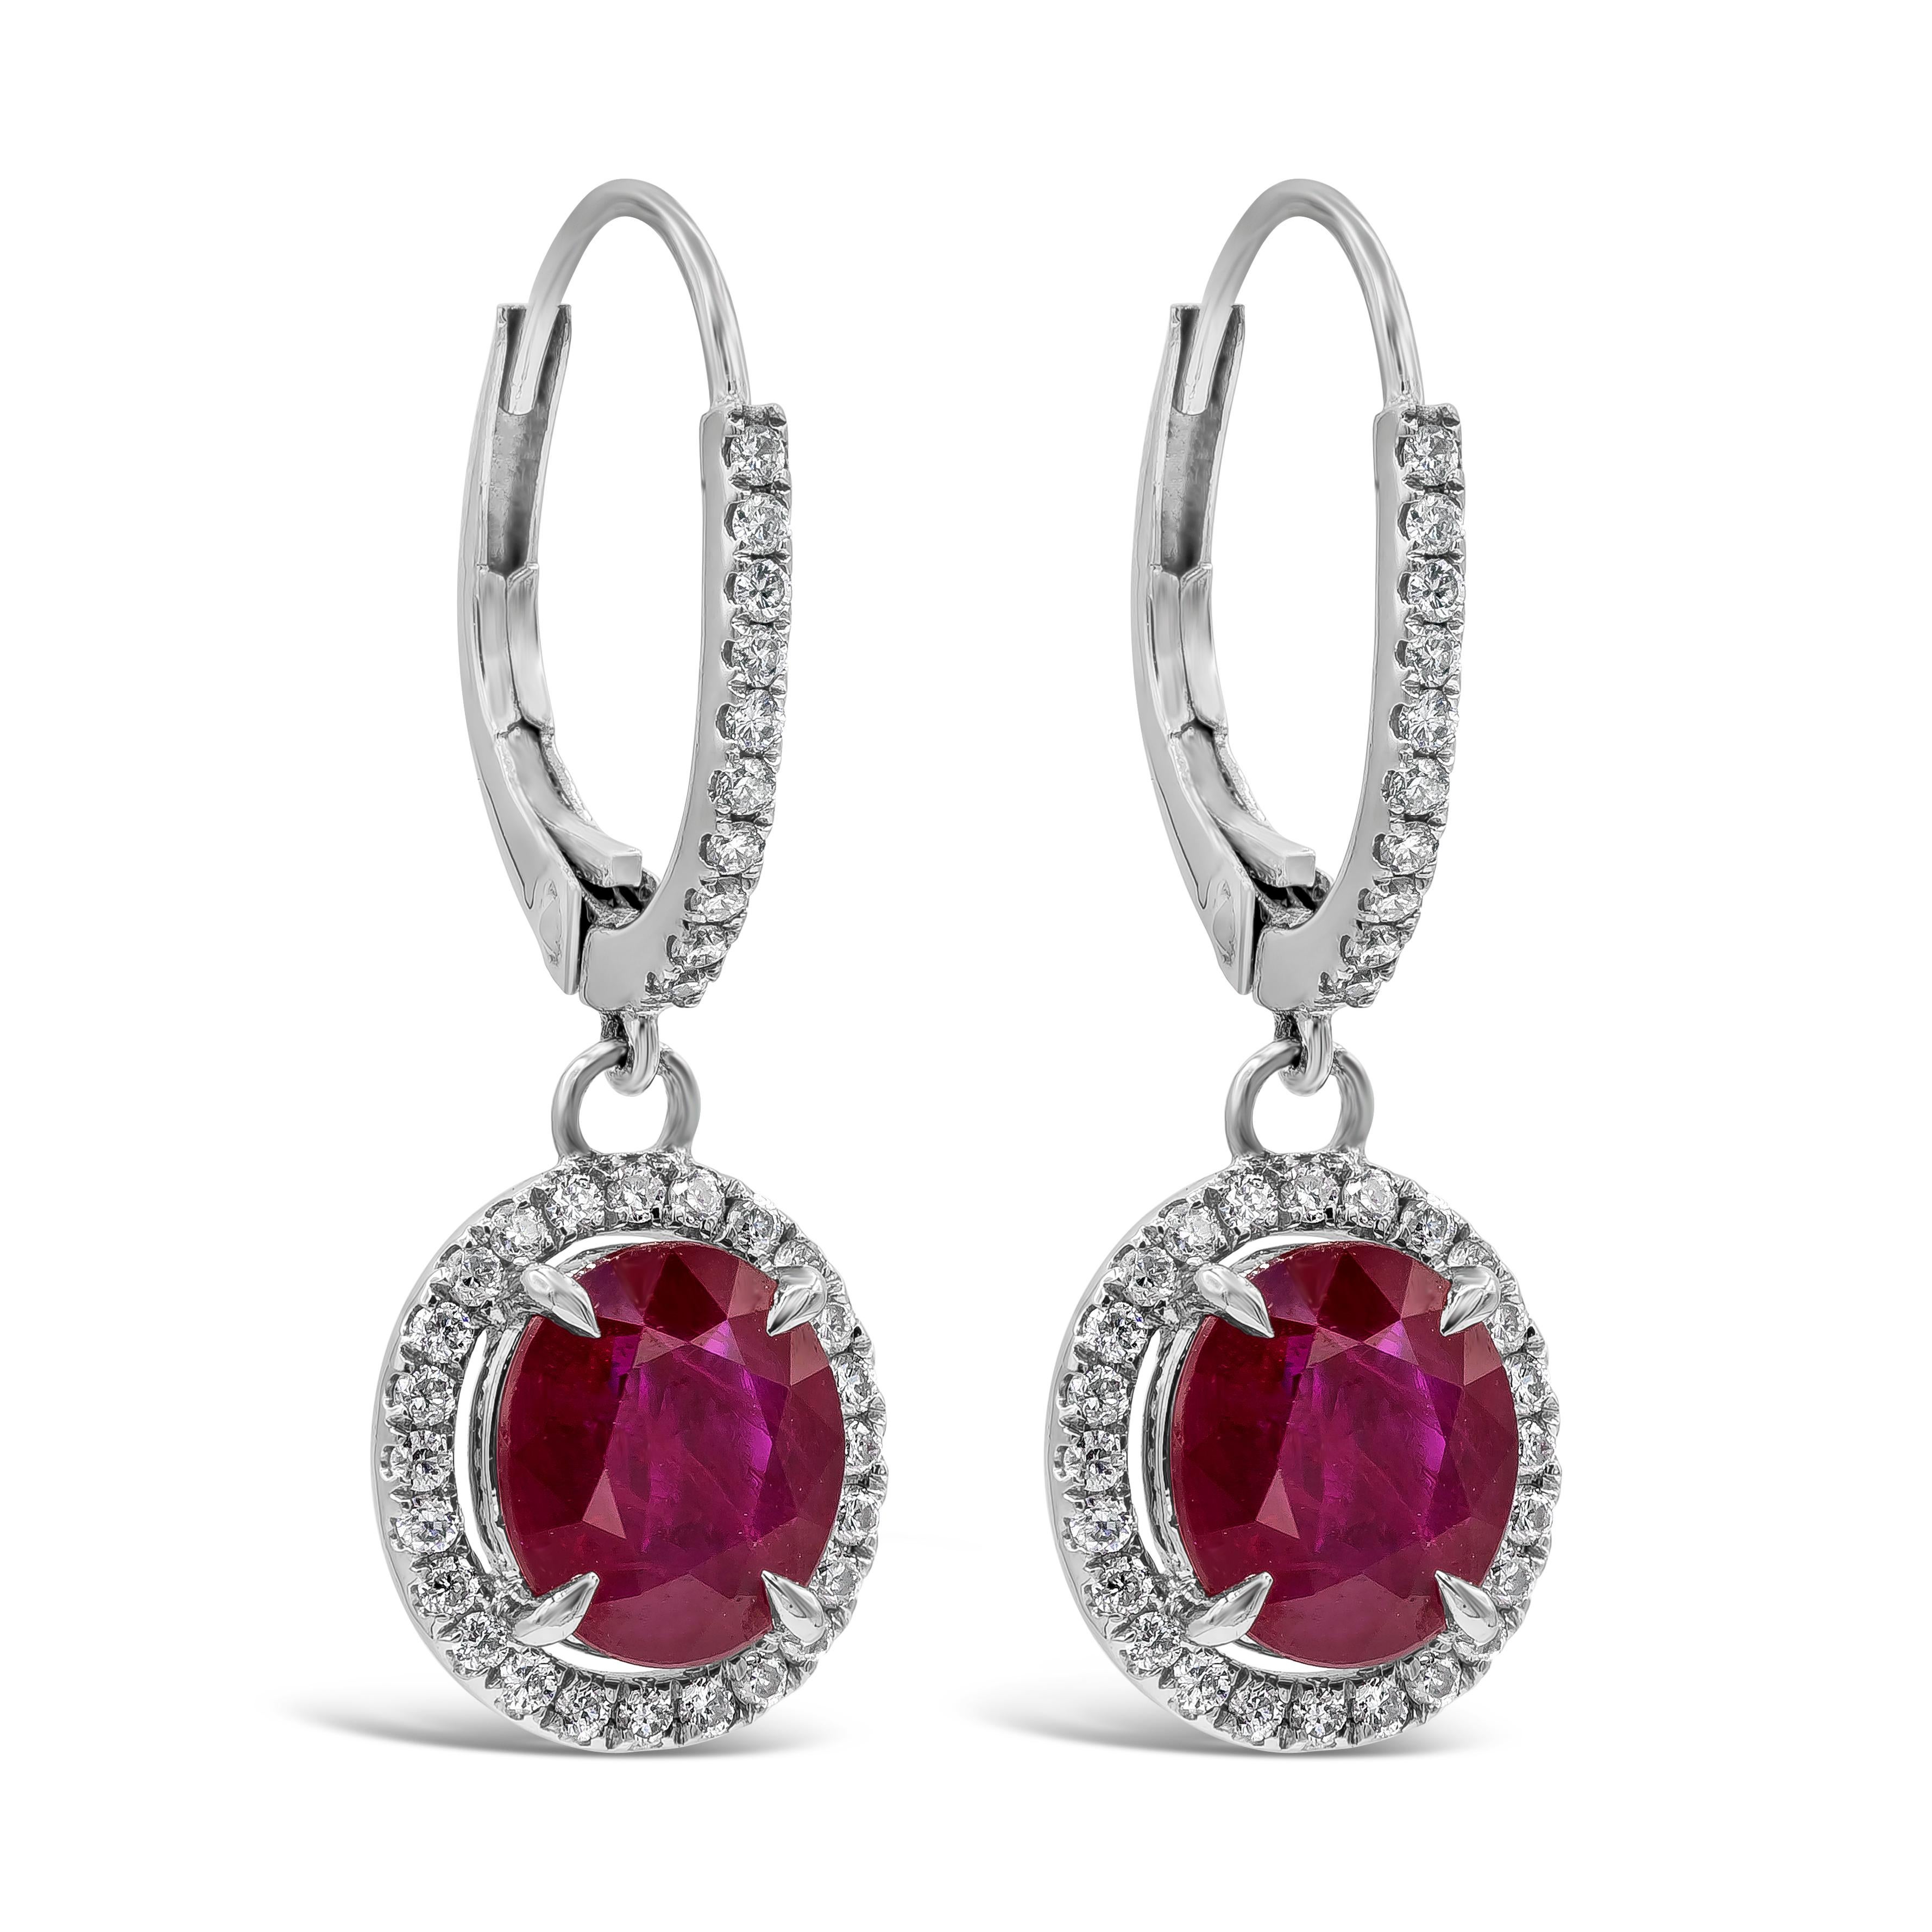 A chic and charming pair of dangling earrings showcasing two oval cut red rubies weighing 2.83 carats total, Surrounded by a row of brilliant round diamonds in a halo design weighing 0.29 carats total. Suspended on a diamond encrusted lever back,